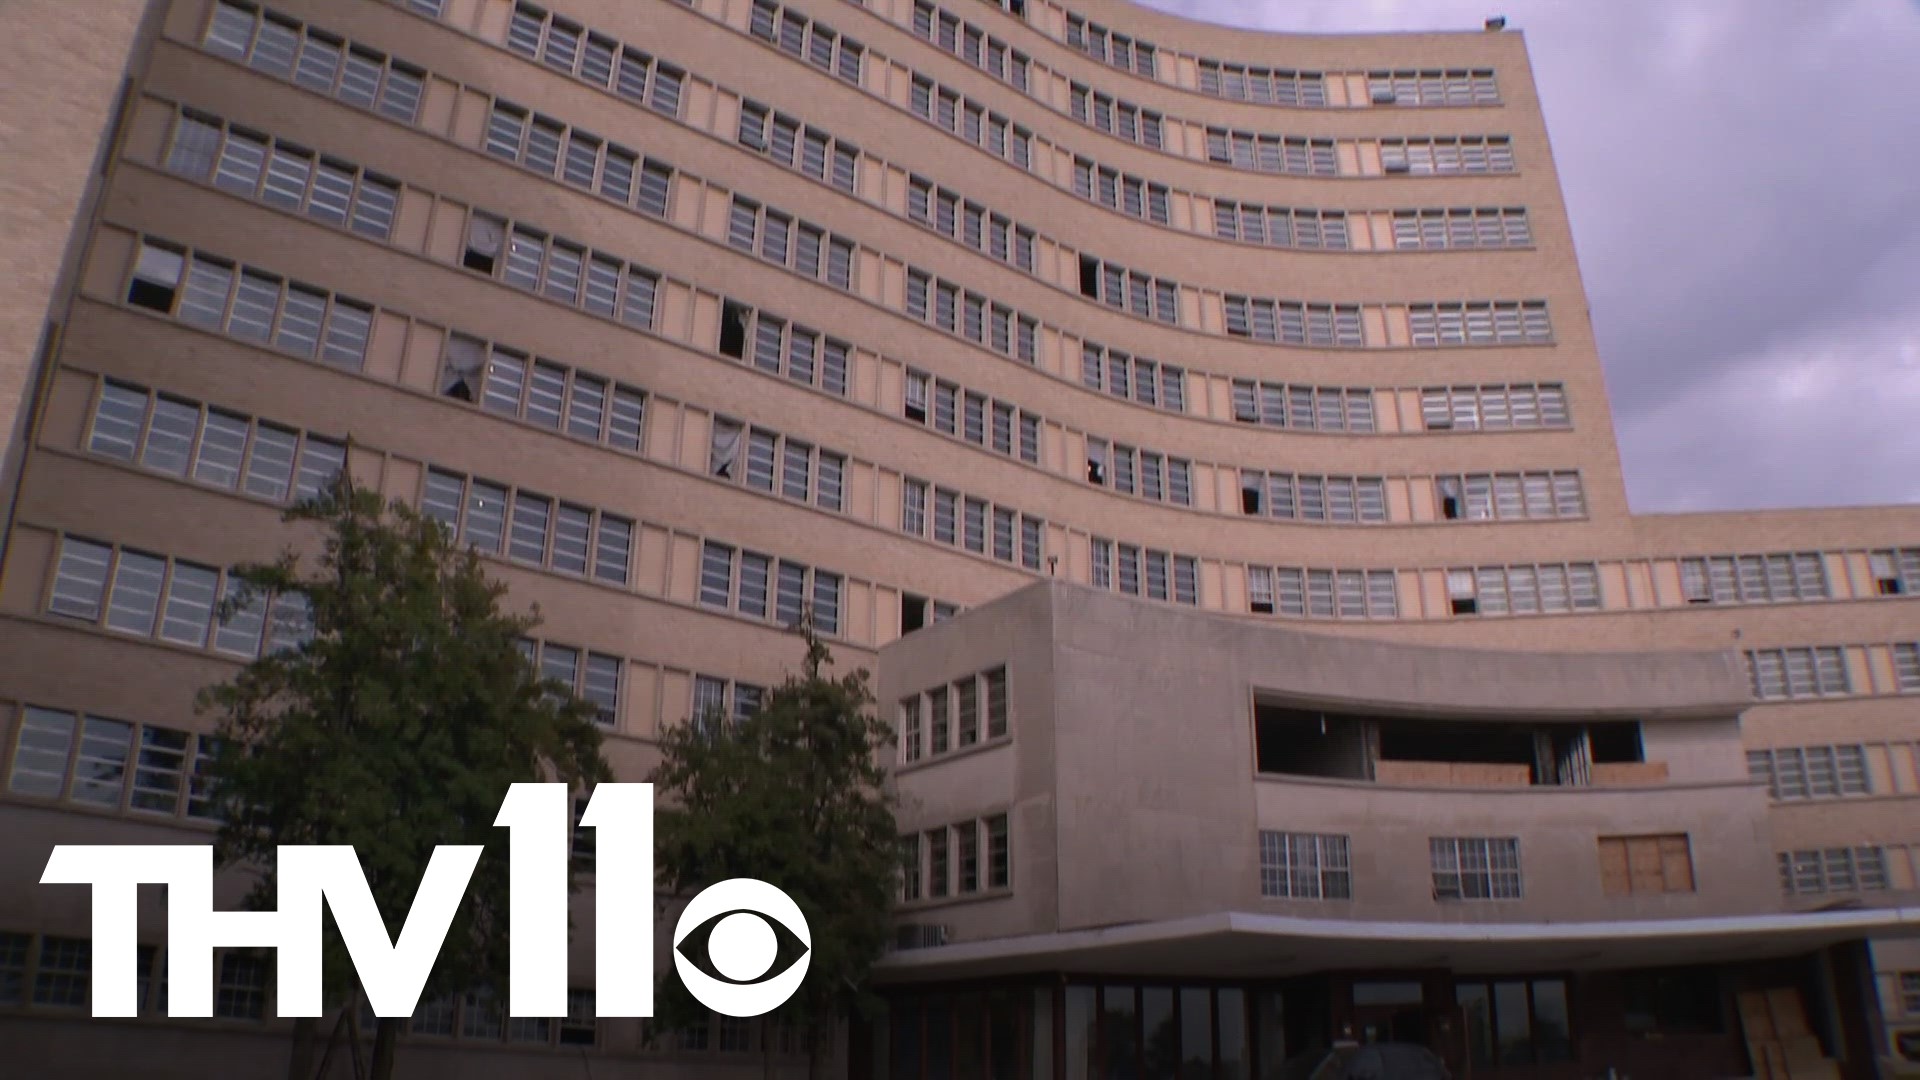 The former Little Rock VA hospital first opened its doors in 1950 and now it's getting a makeover and will be turned into an apartment complex.